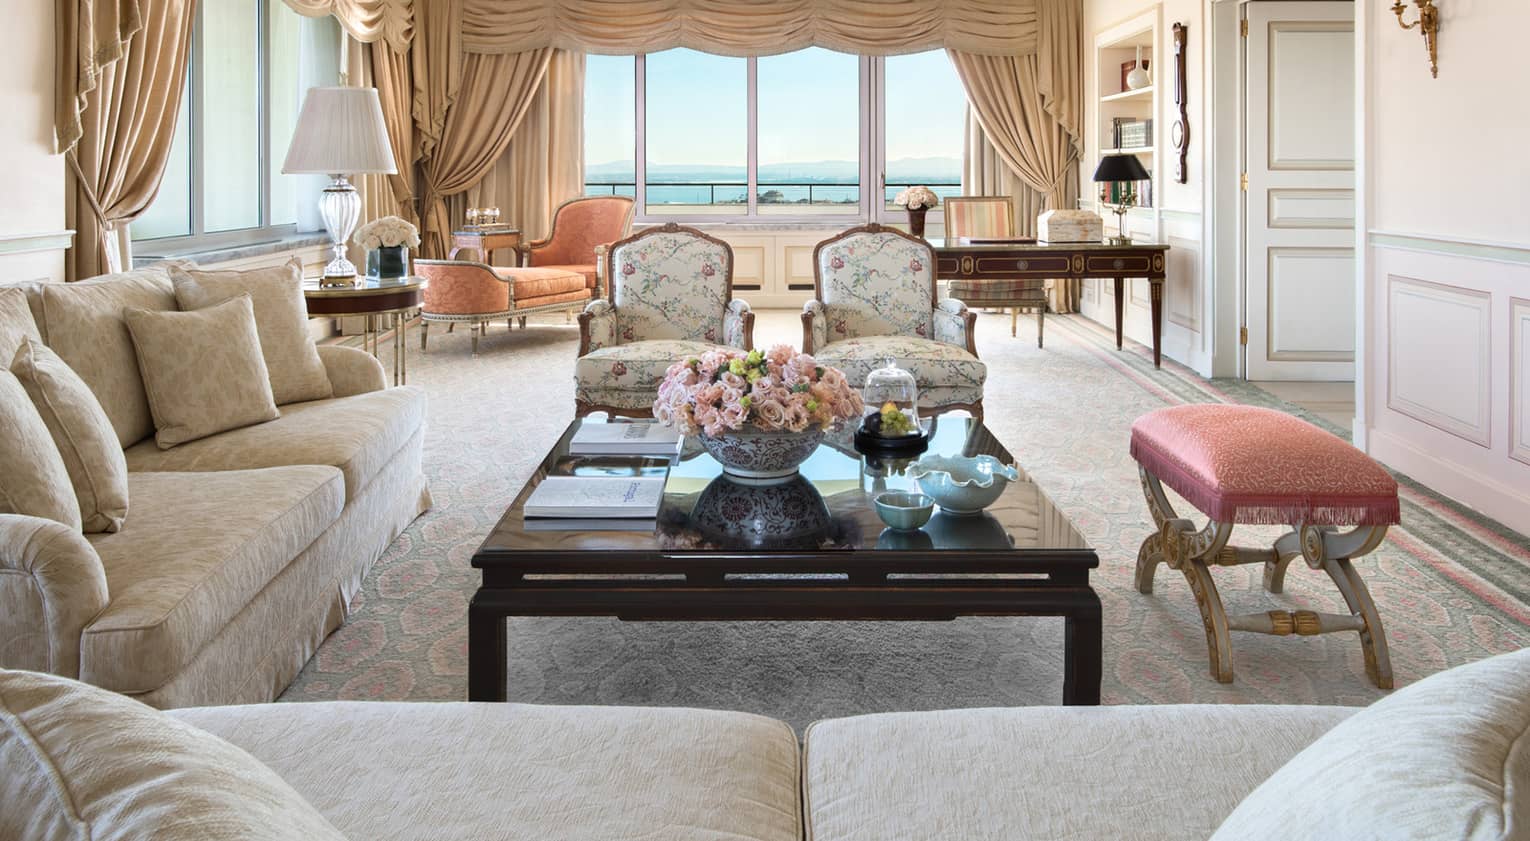 Side view of Presidential Suite seating area, coffee table, bench, two wing chairs, orange chaise, tall windows with views